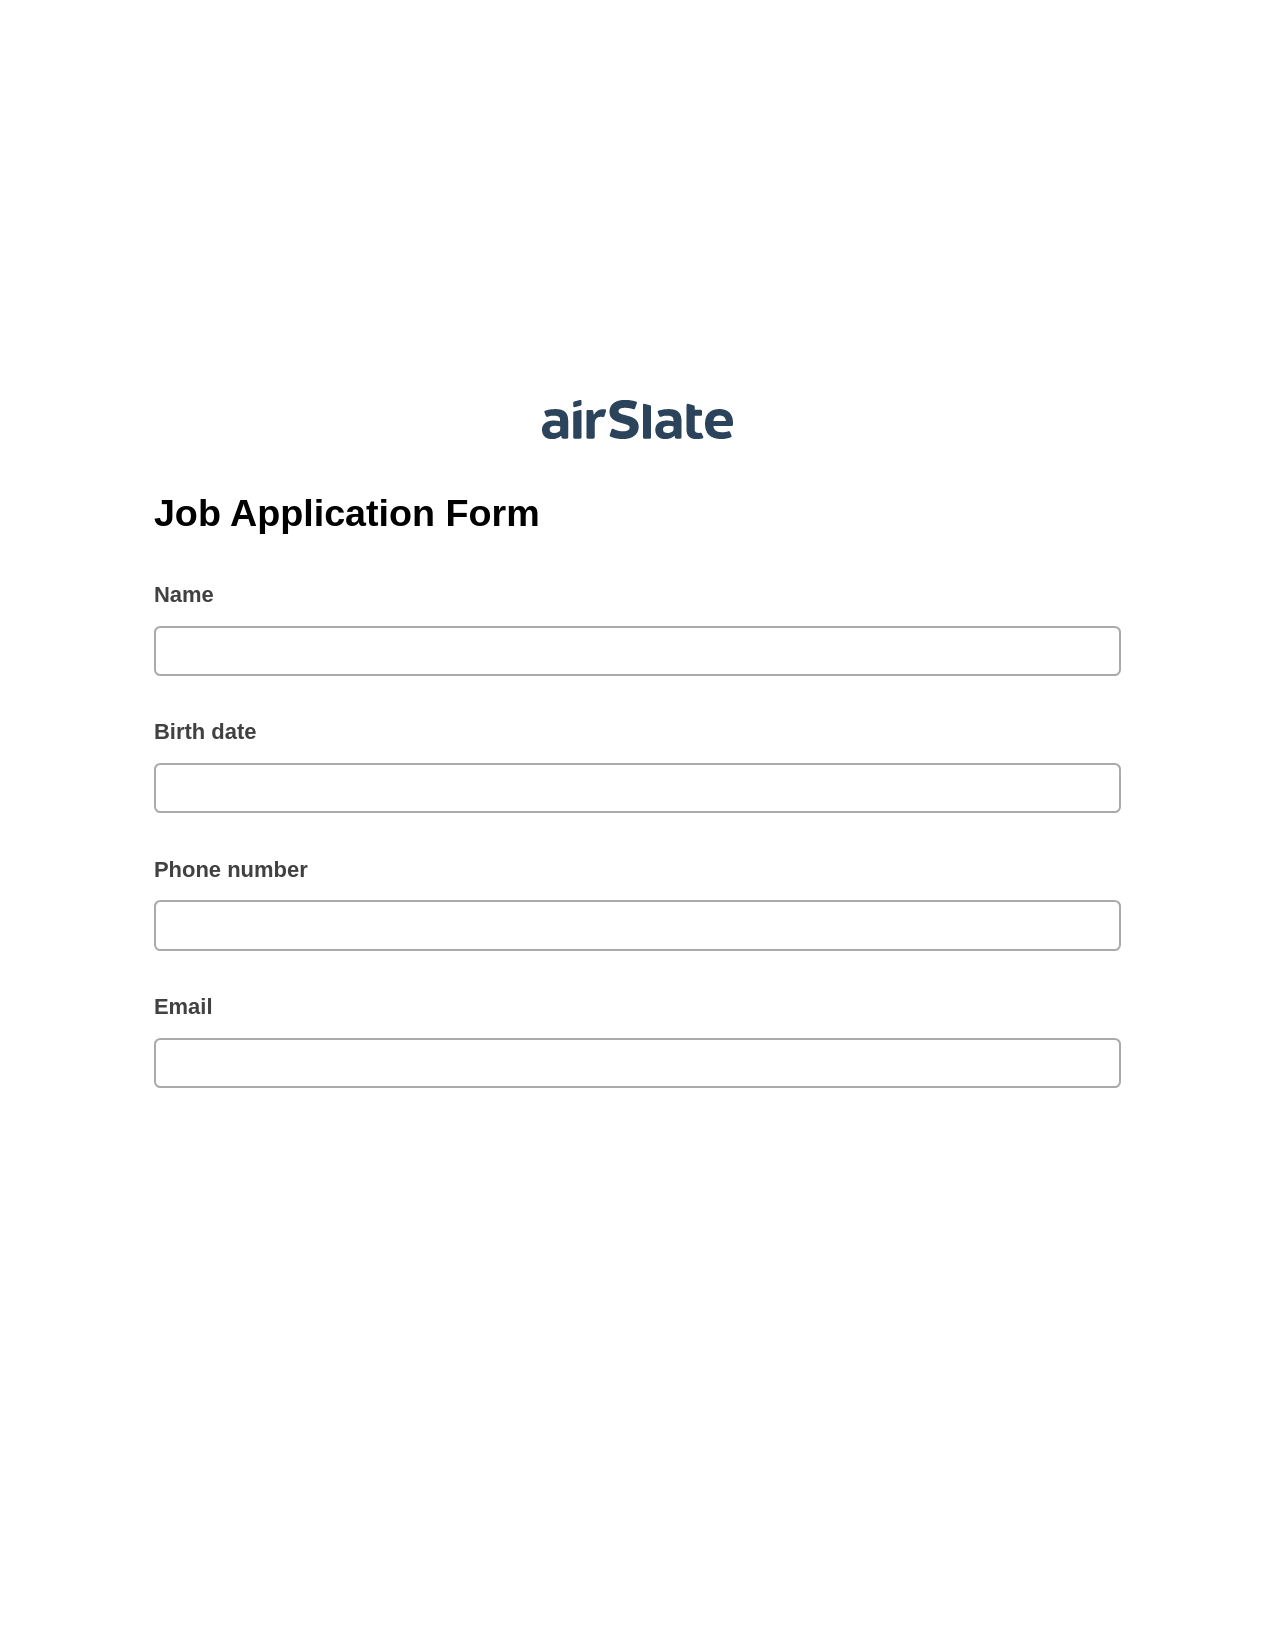 Multirole Job Application Form Pre-fill Slate from MS Dynamics 365 Records Bot, Create MS Dynamics 365 Records Bot, Text Message Notification Postfinish Bot